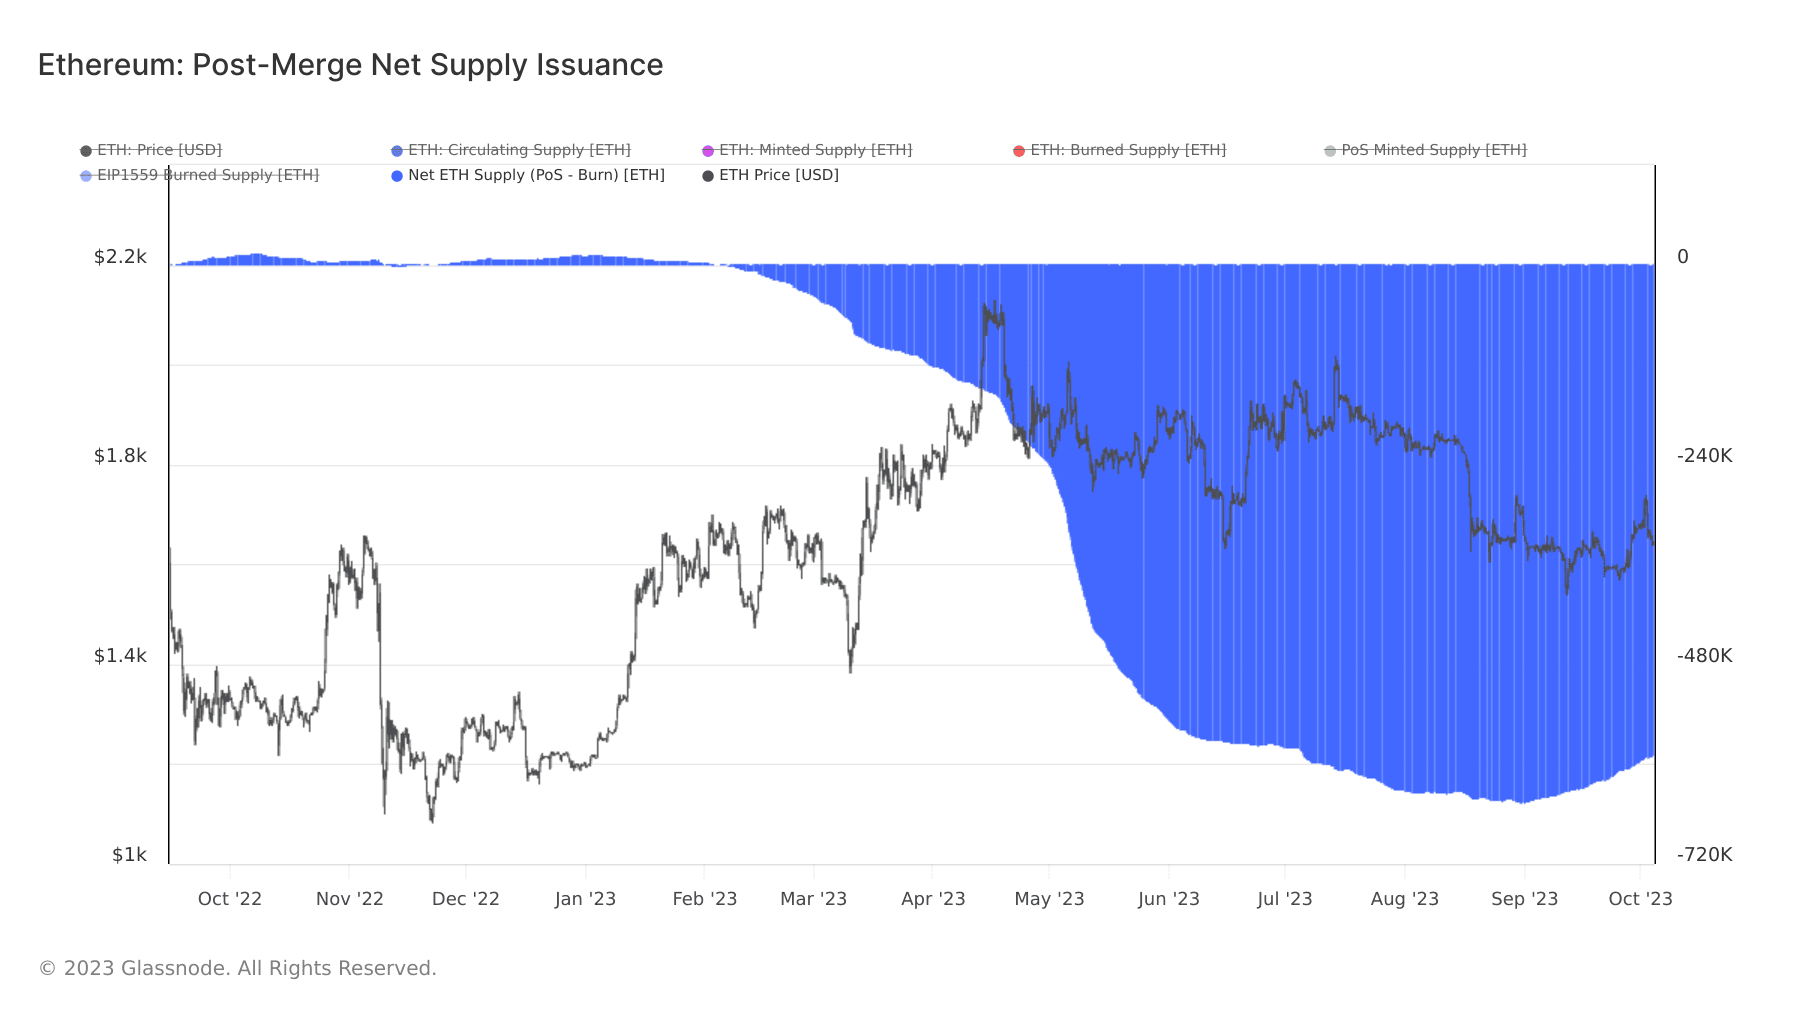 Ethereum inflation rate over time.